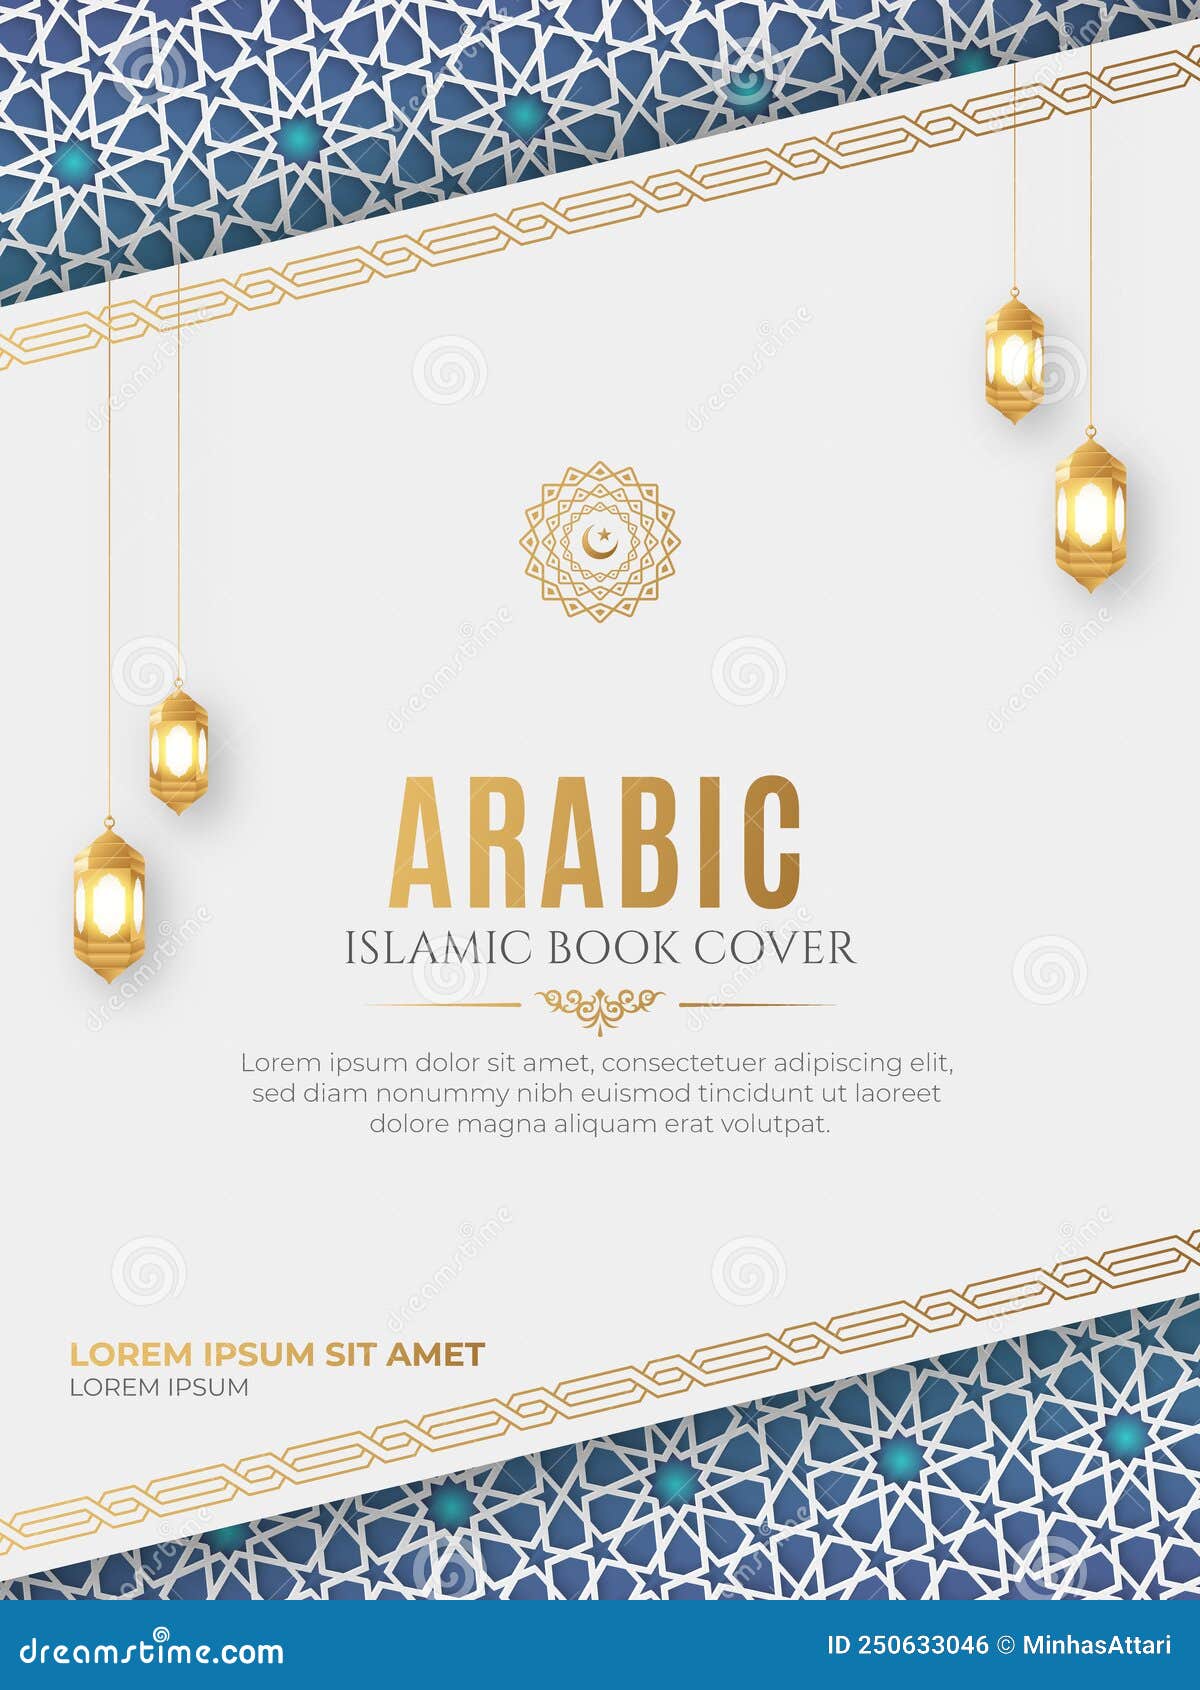 arabic assignment front page design